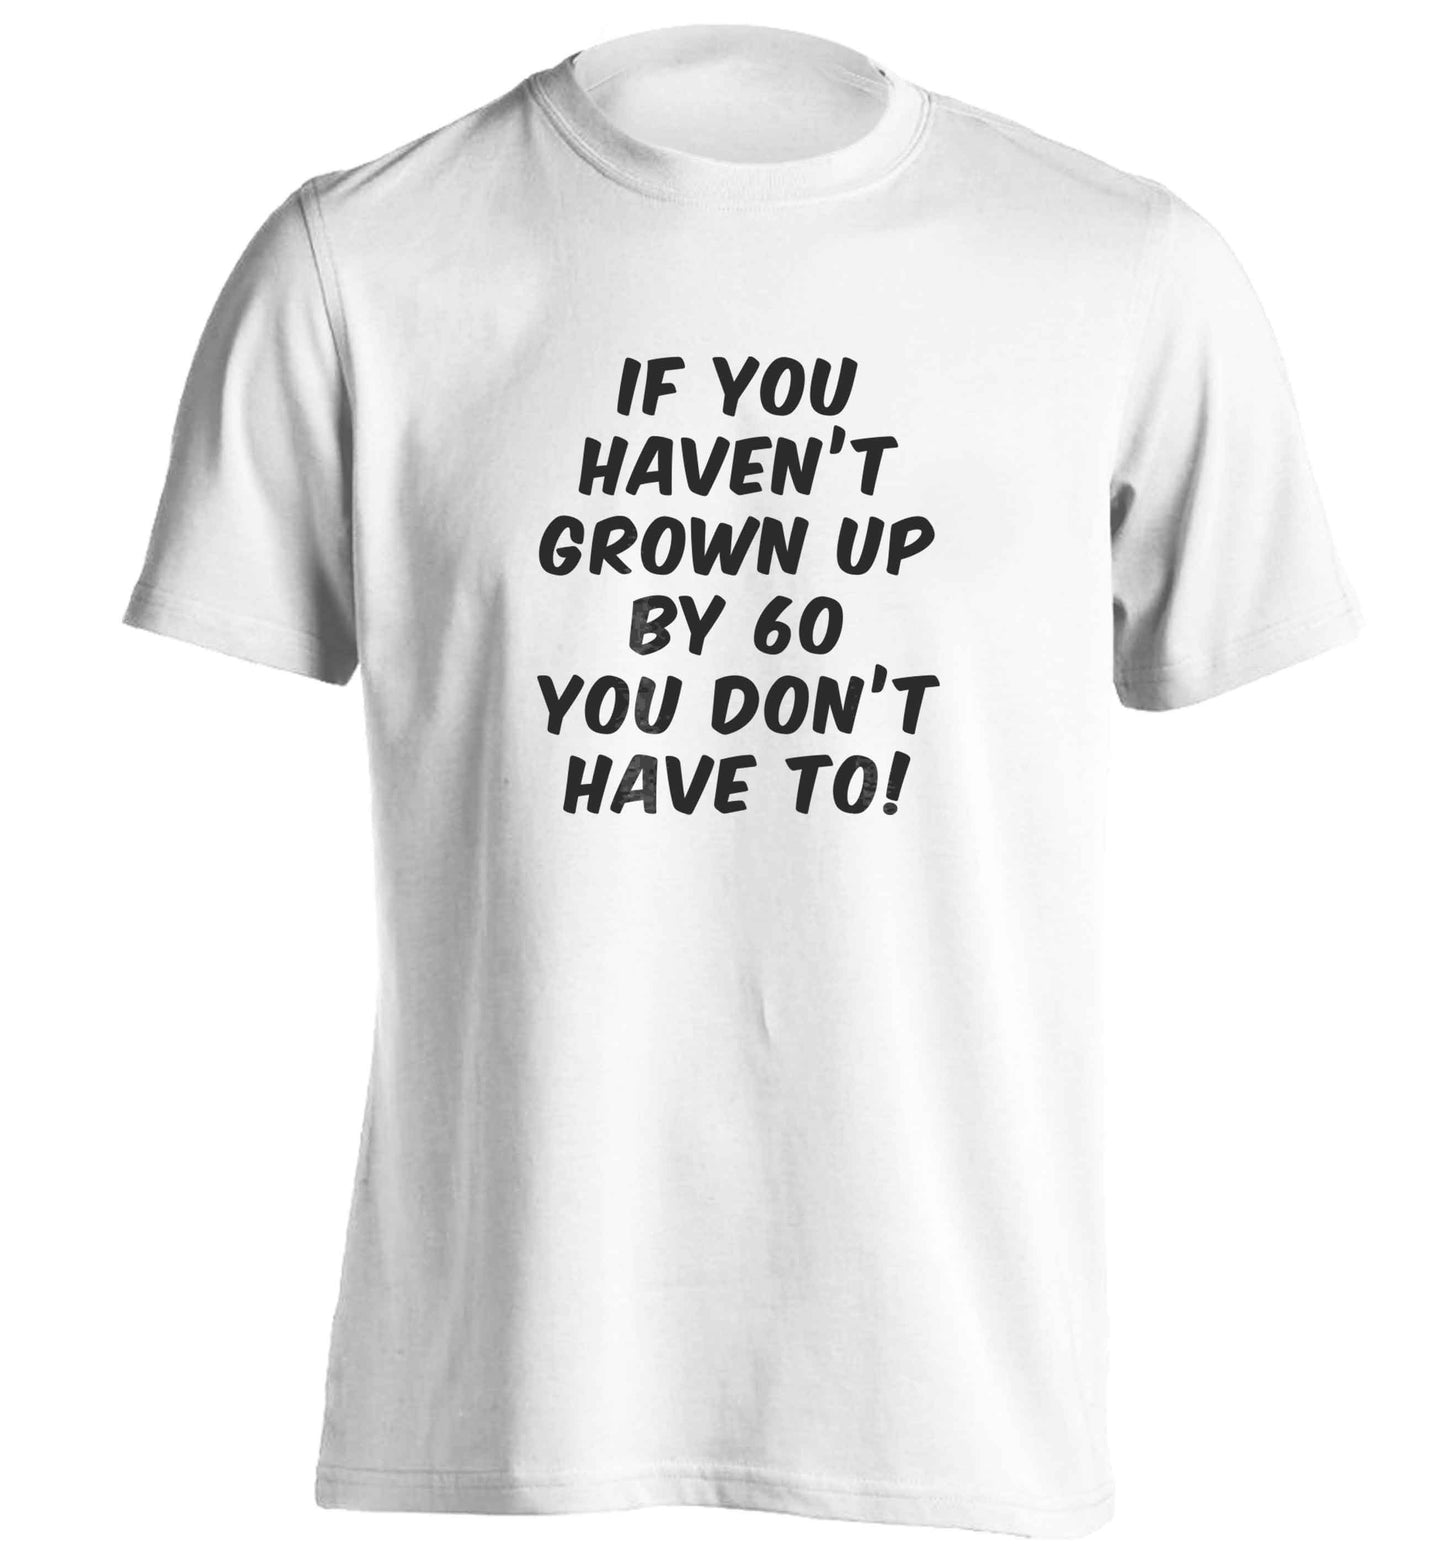 If you haven't grown up by sixty you don't have to adults unisex white Tshirt 2XL